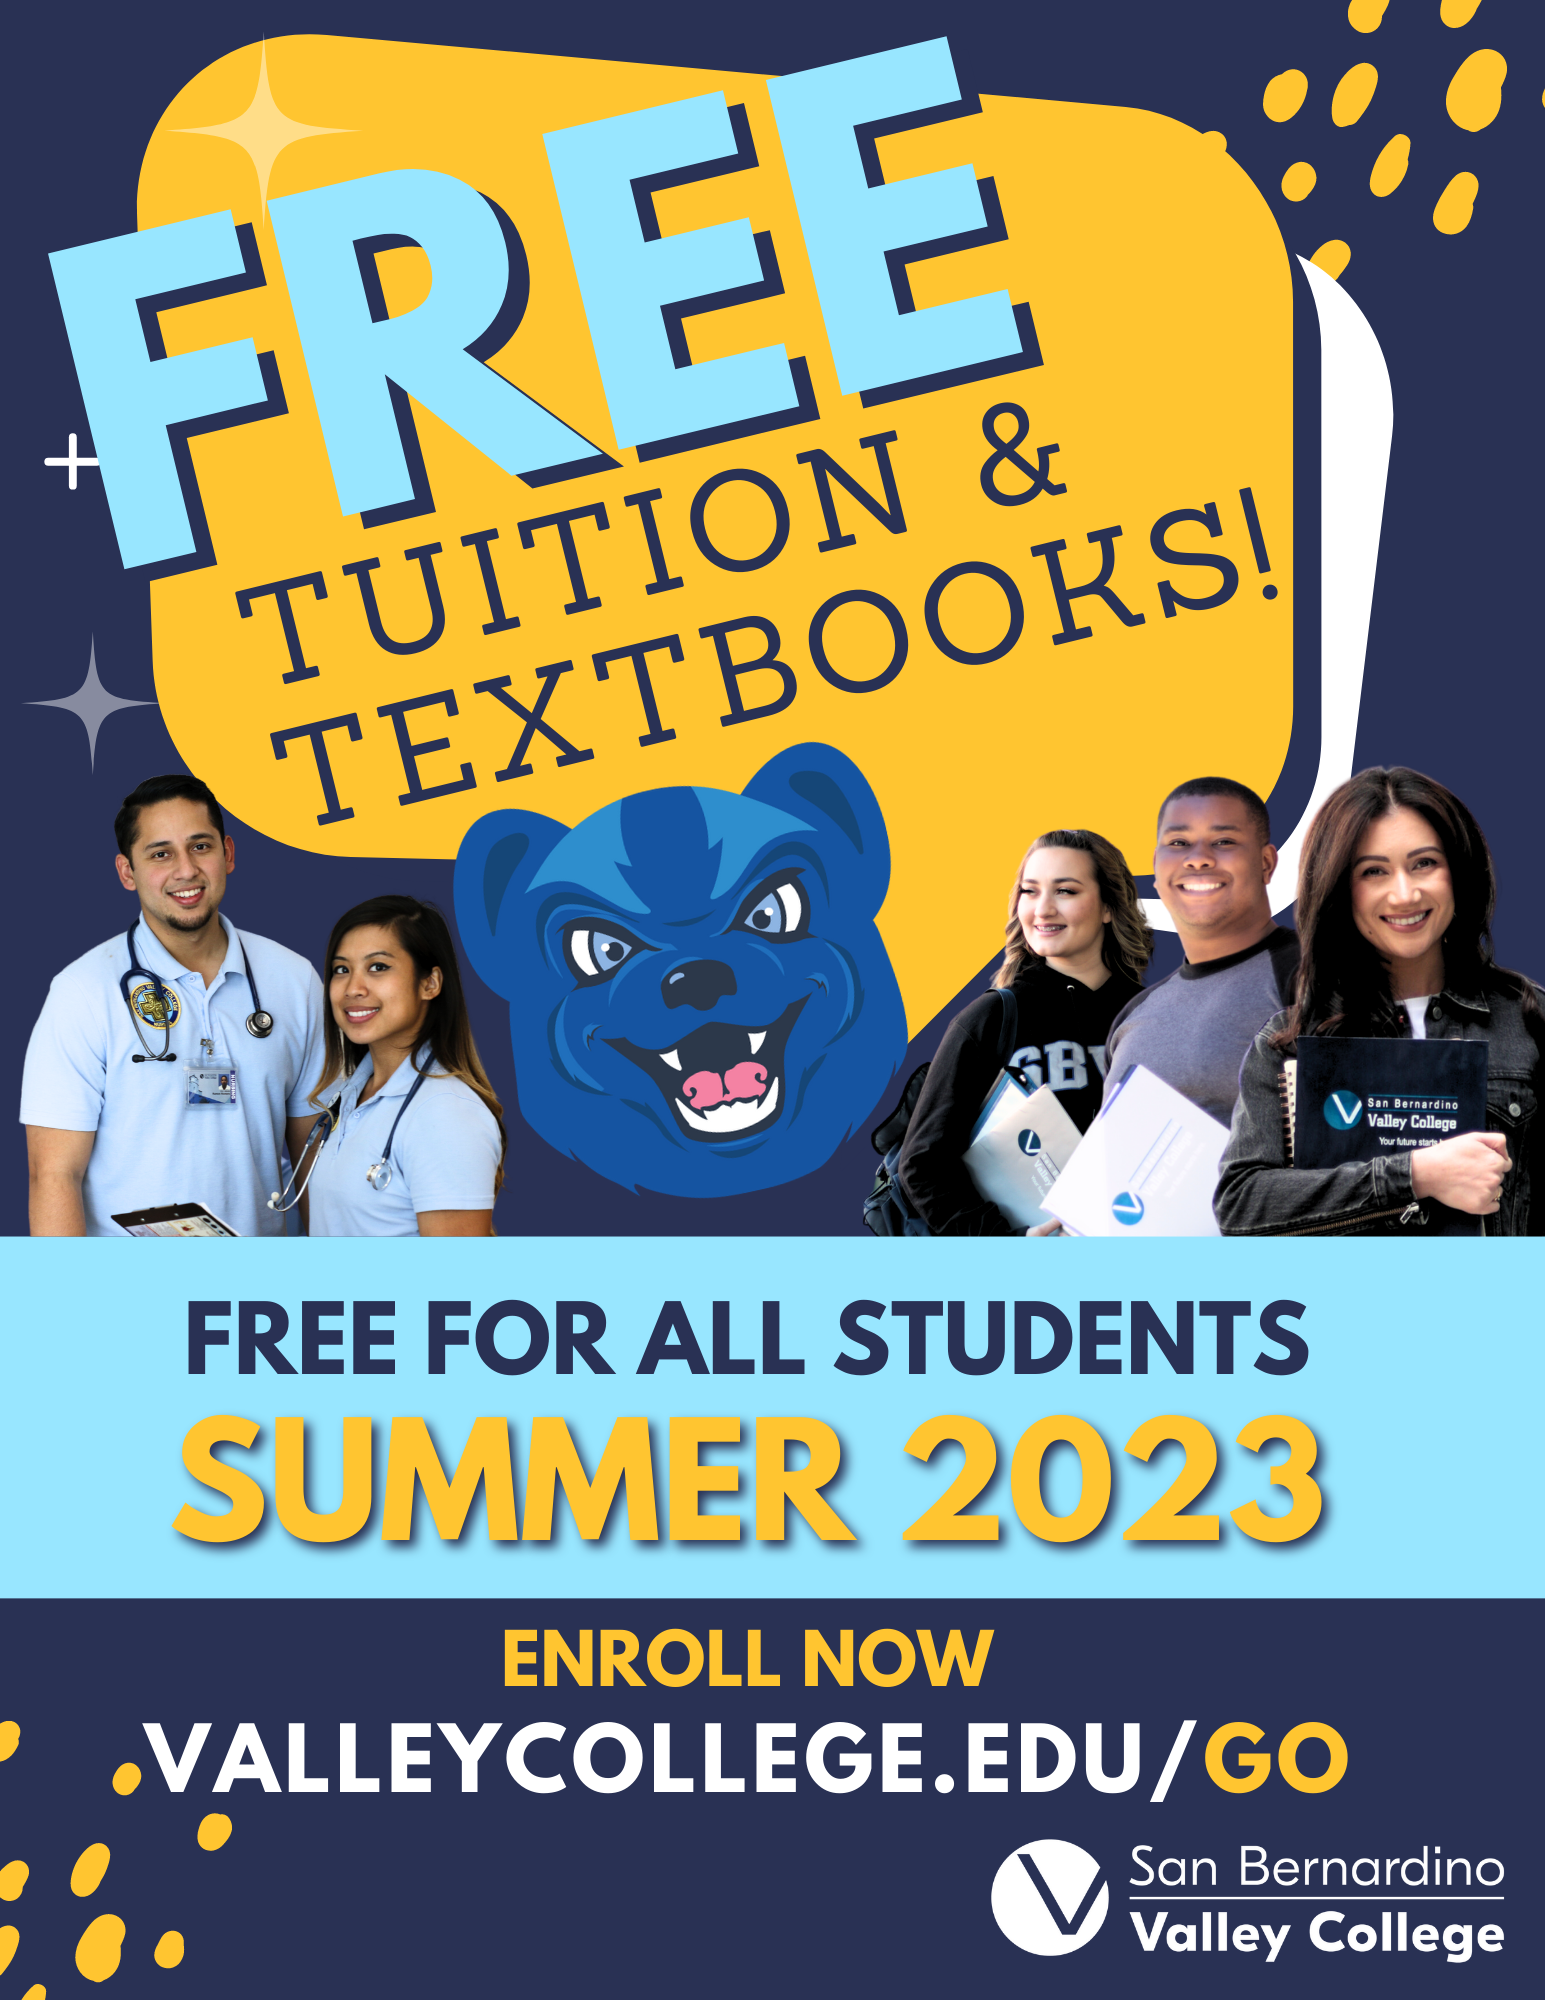 A flyer for free tuition with smiling students and blue